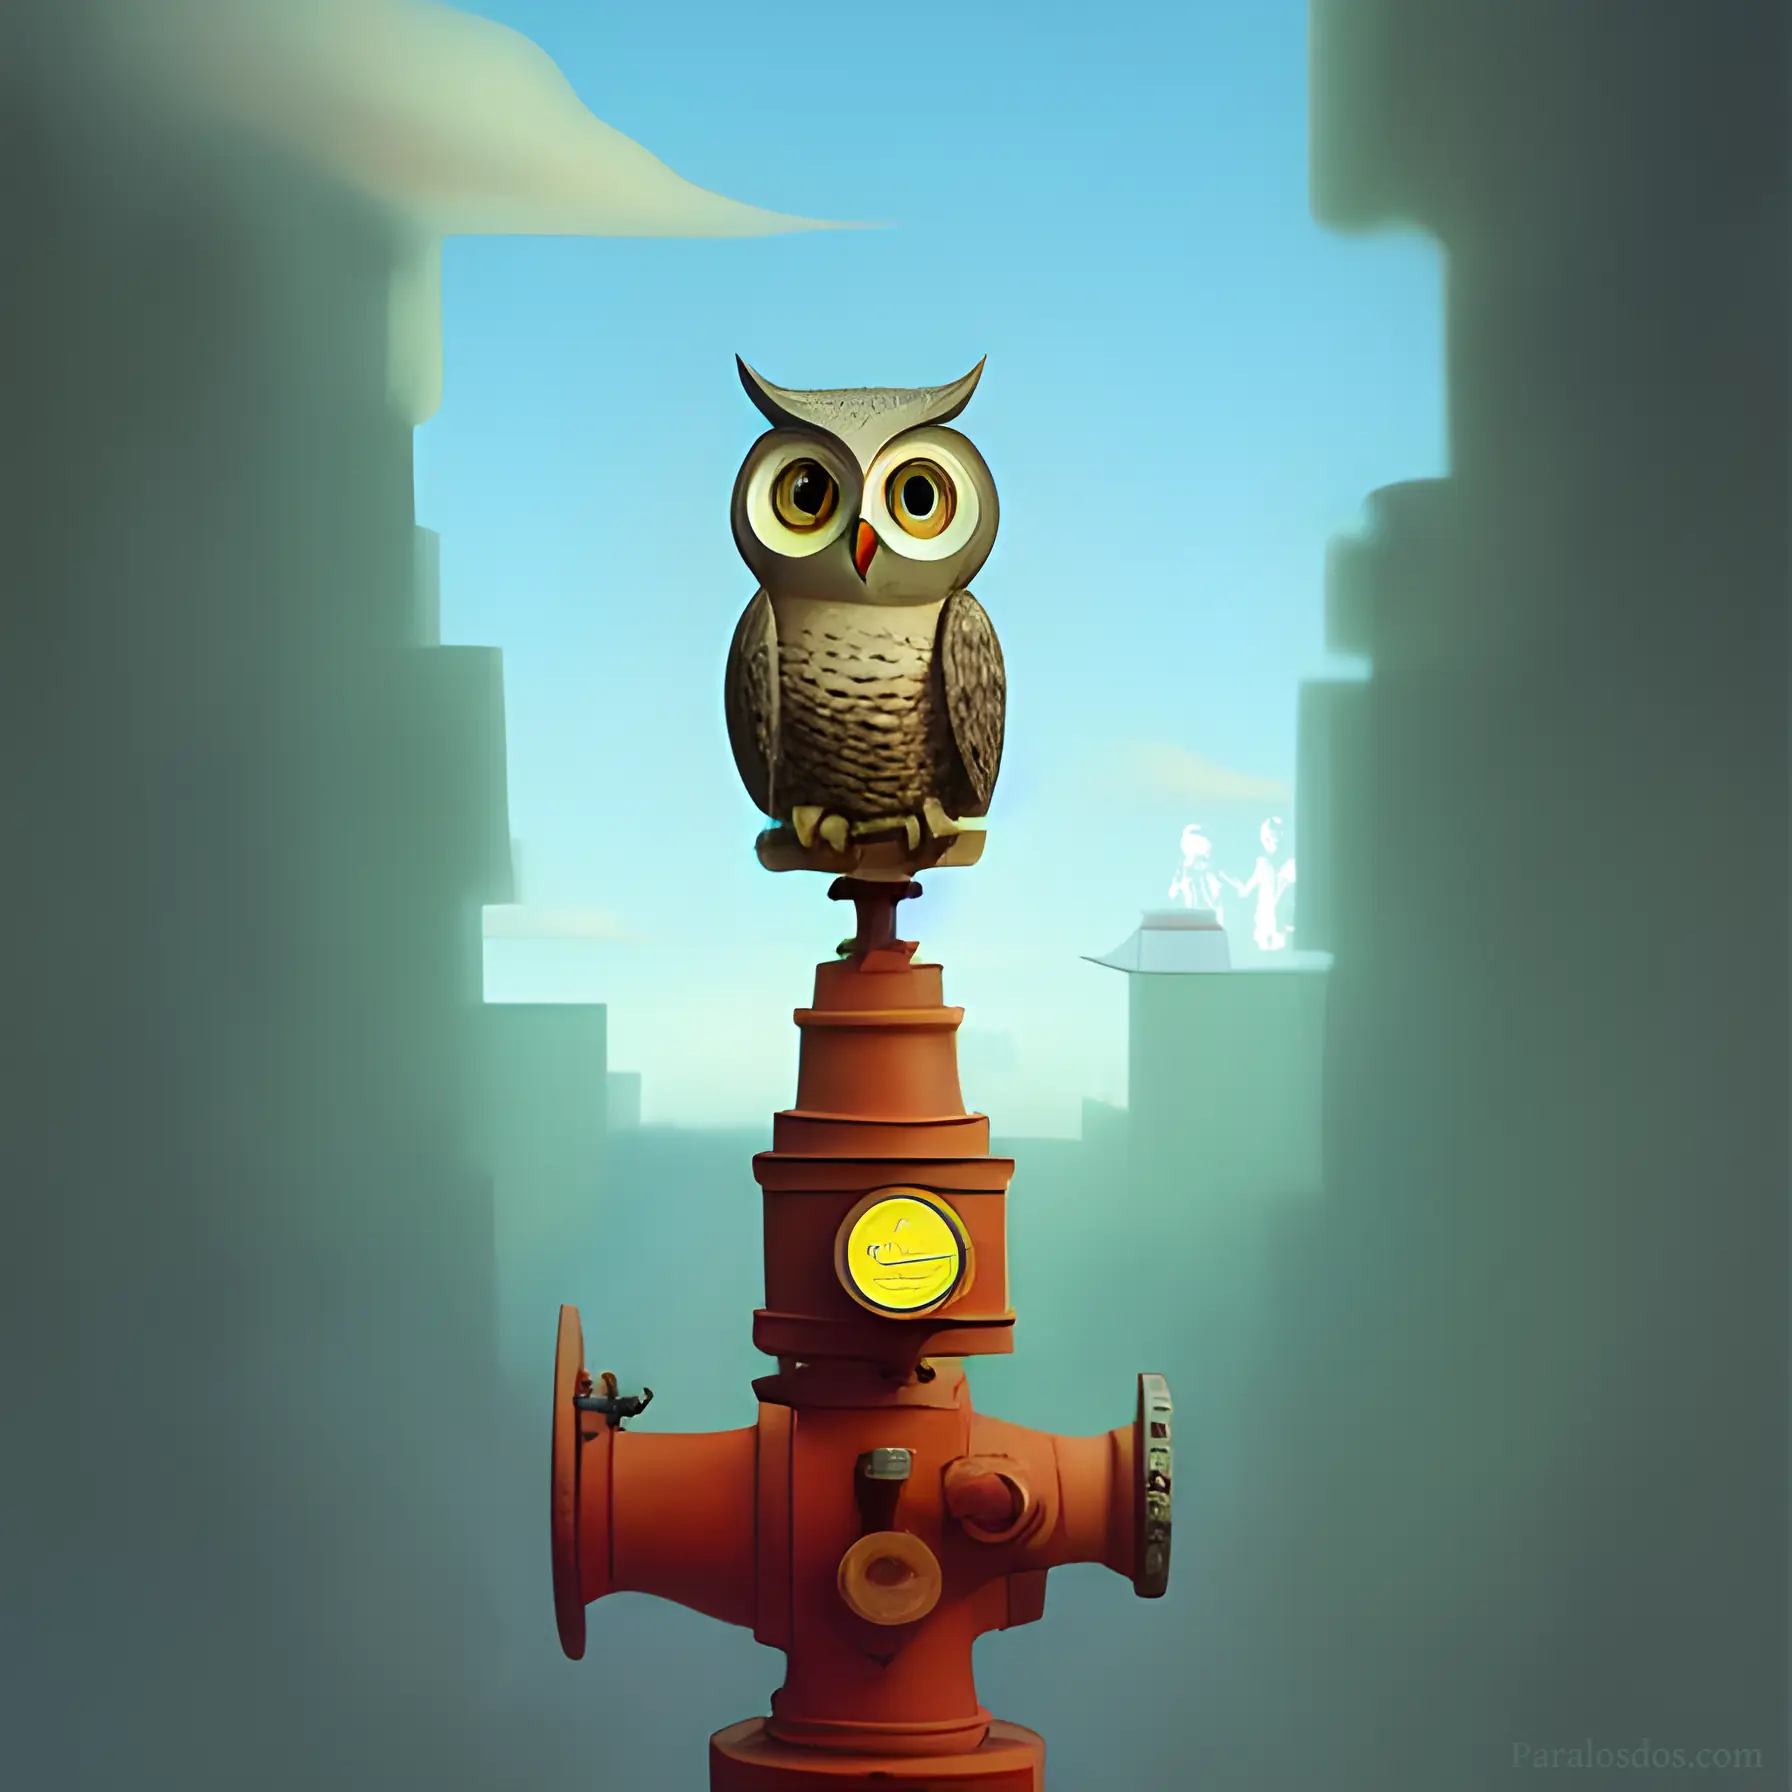 An artistic rendering of an owl perched atop a fire hydrant.